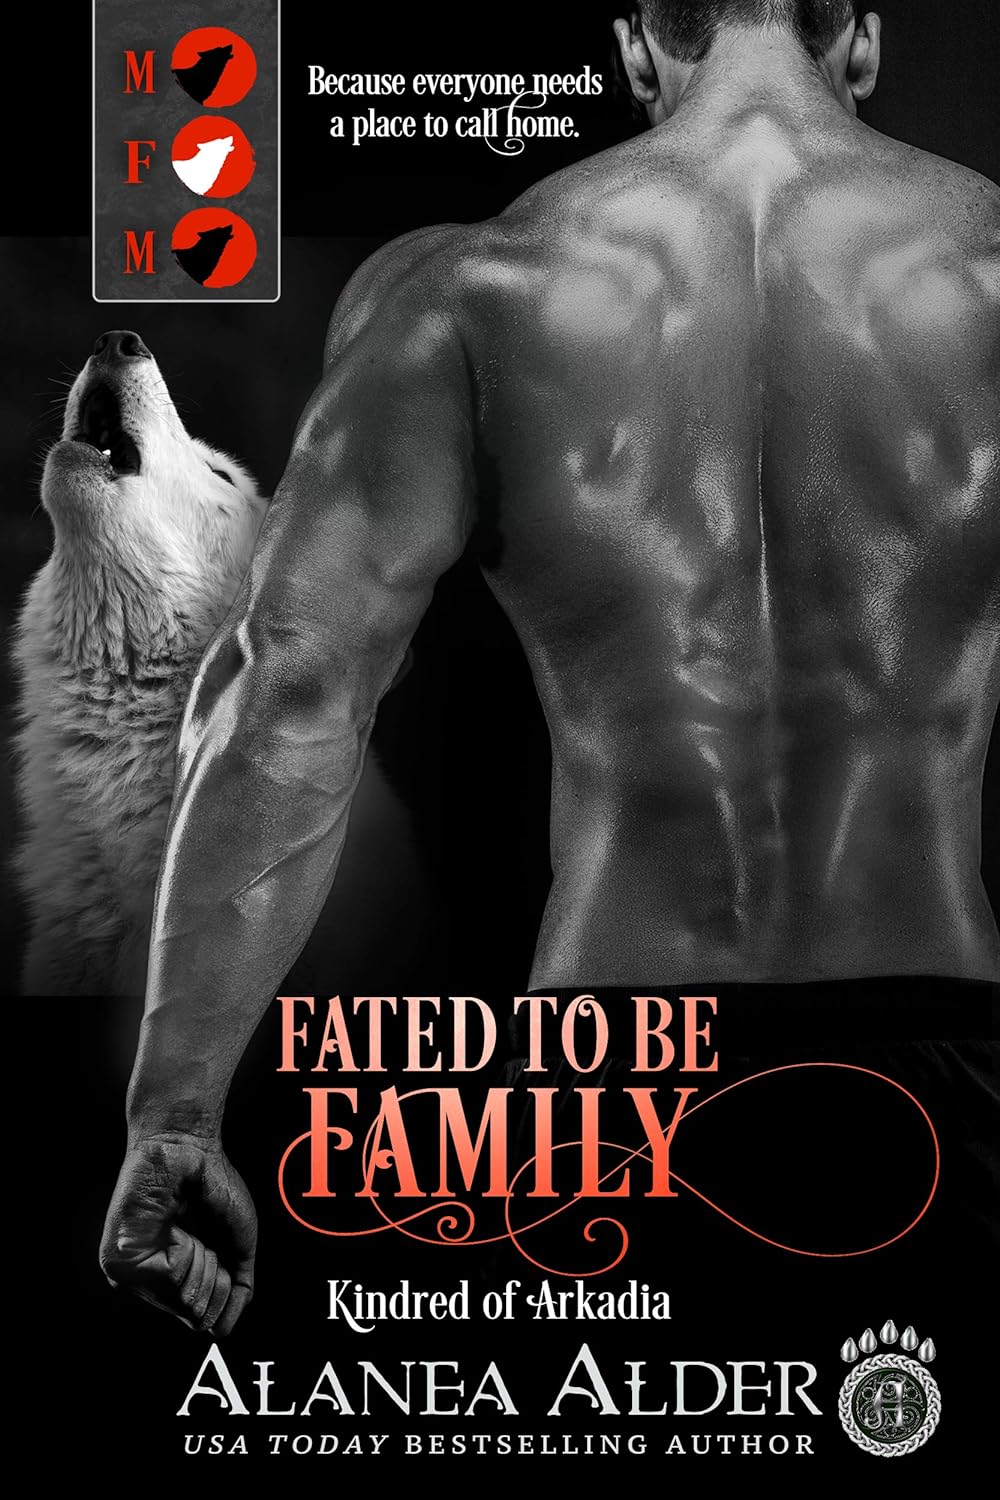 Fated to Be Family - Alanea Alder